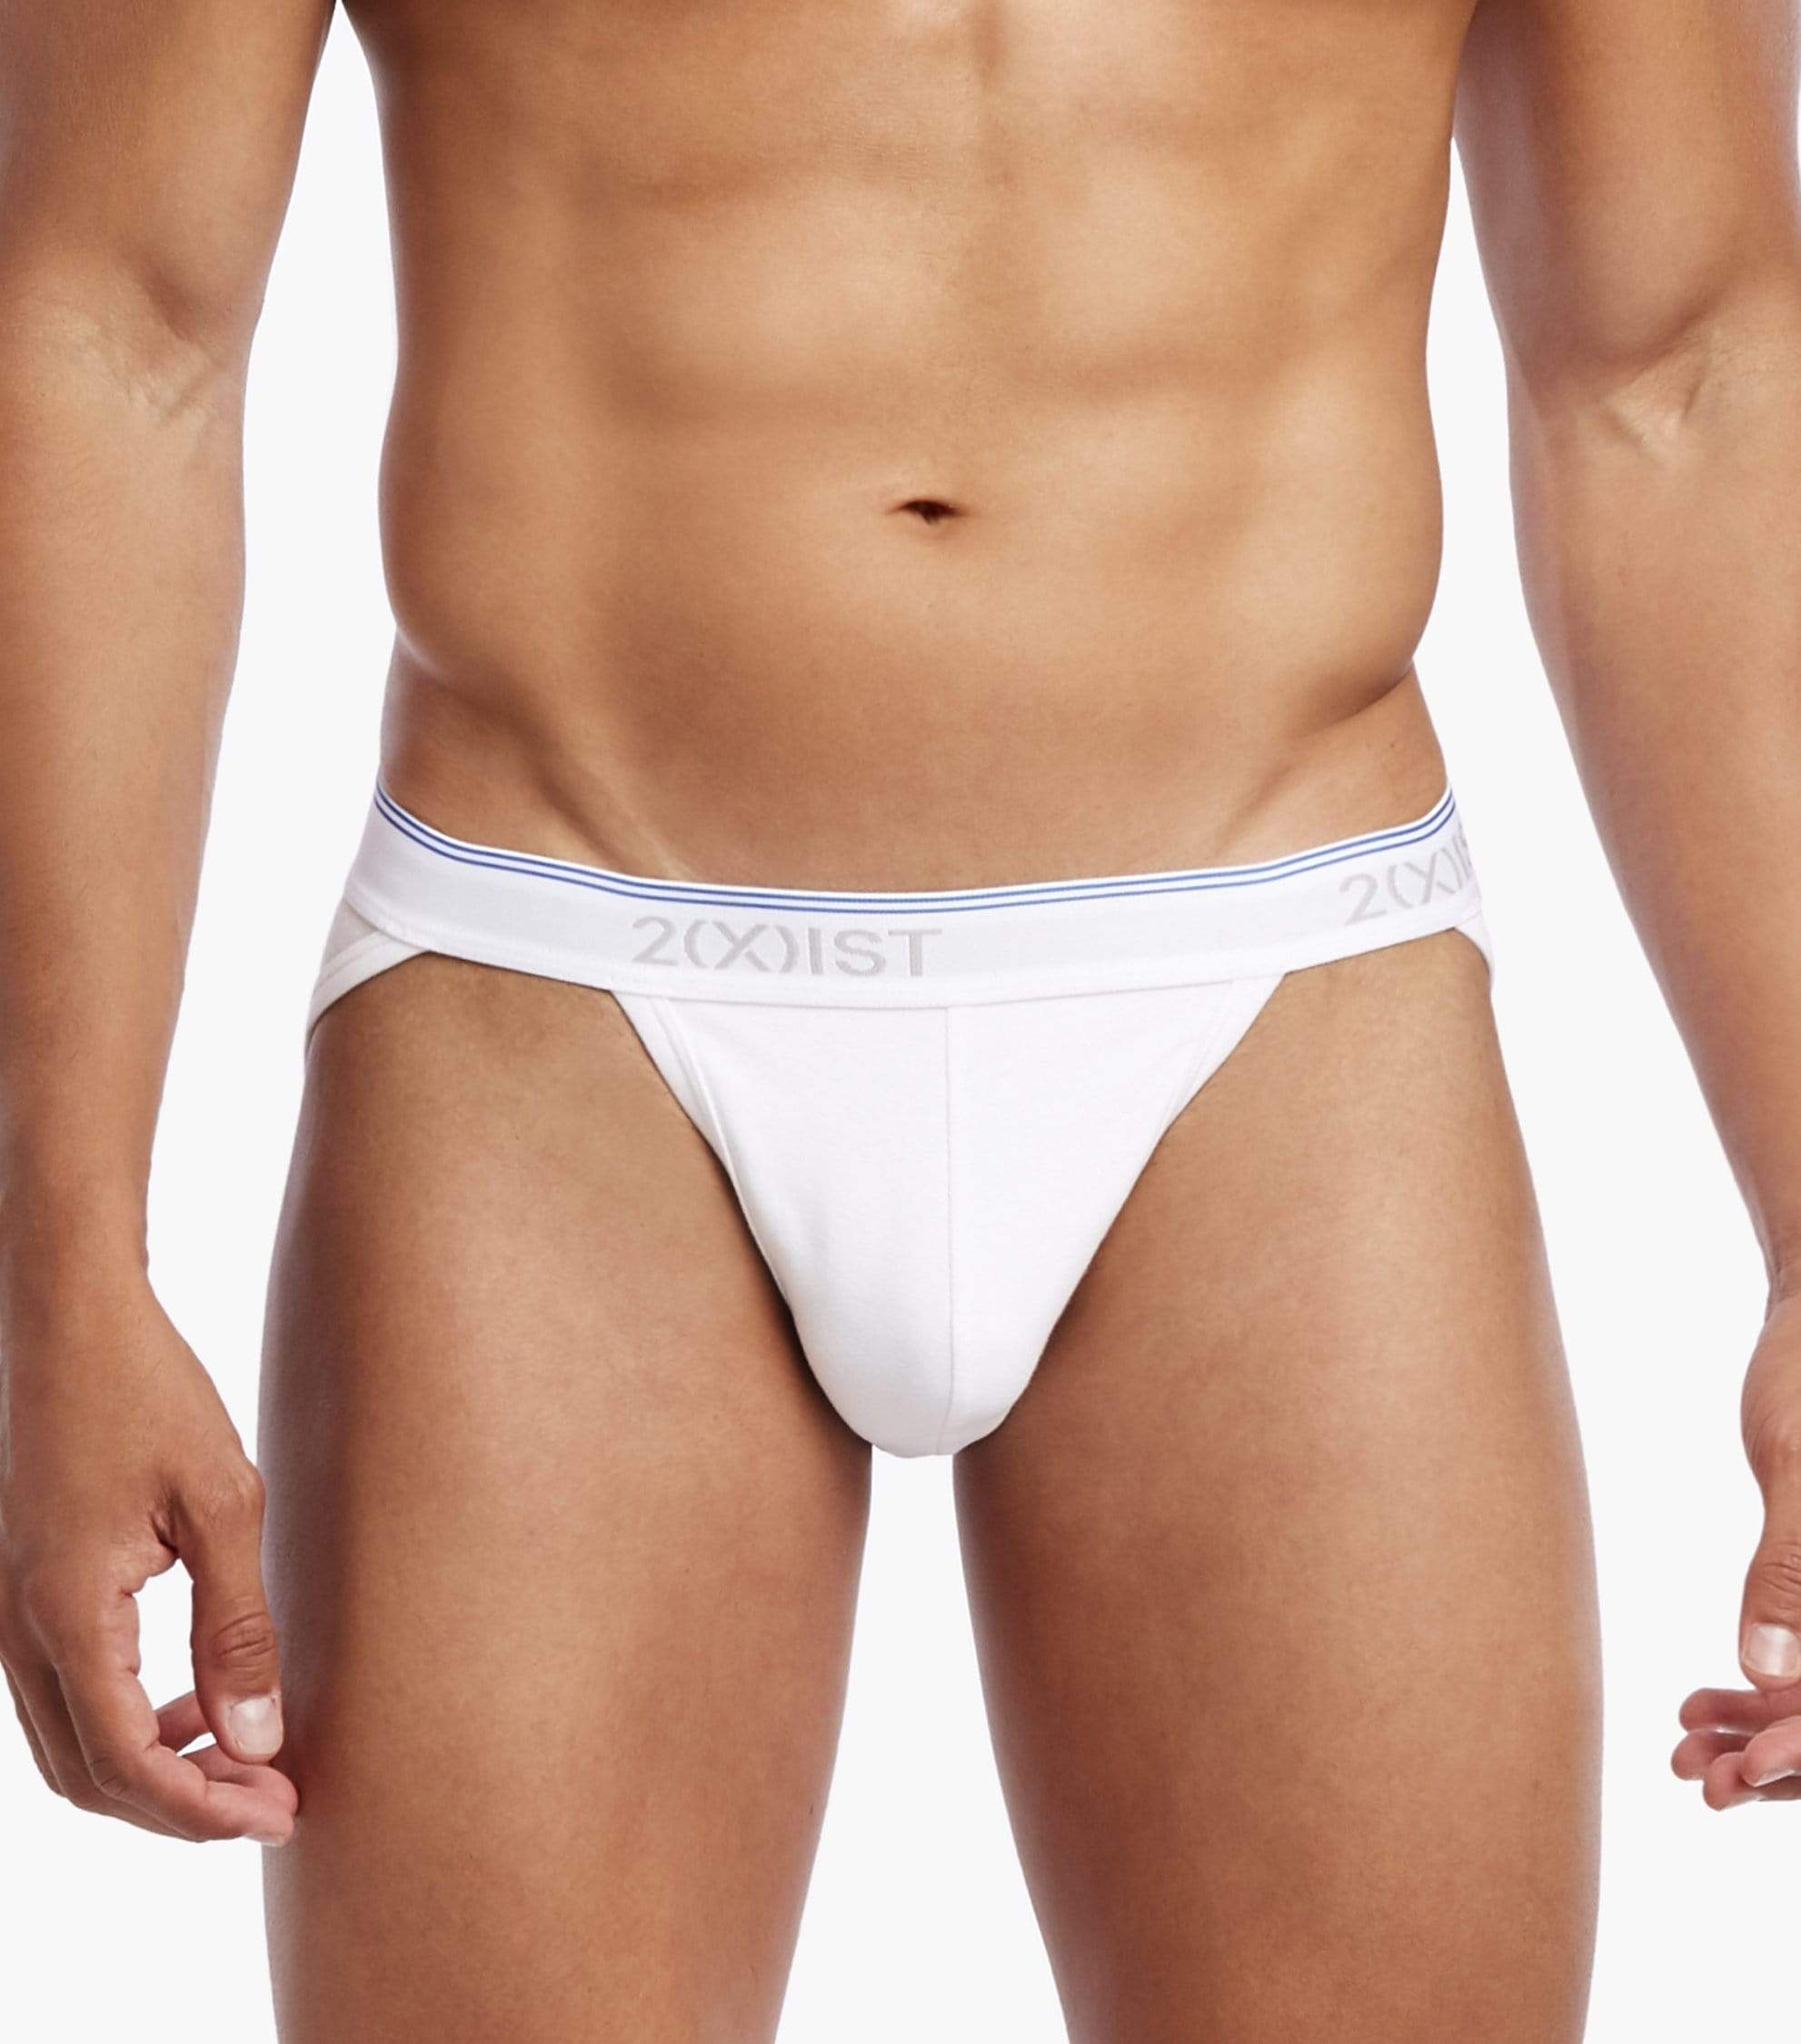 Buy Calvin Klein Cotton Stretch Hip Briefs 3 Pack from Next Germany